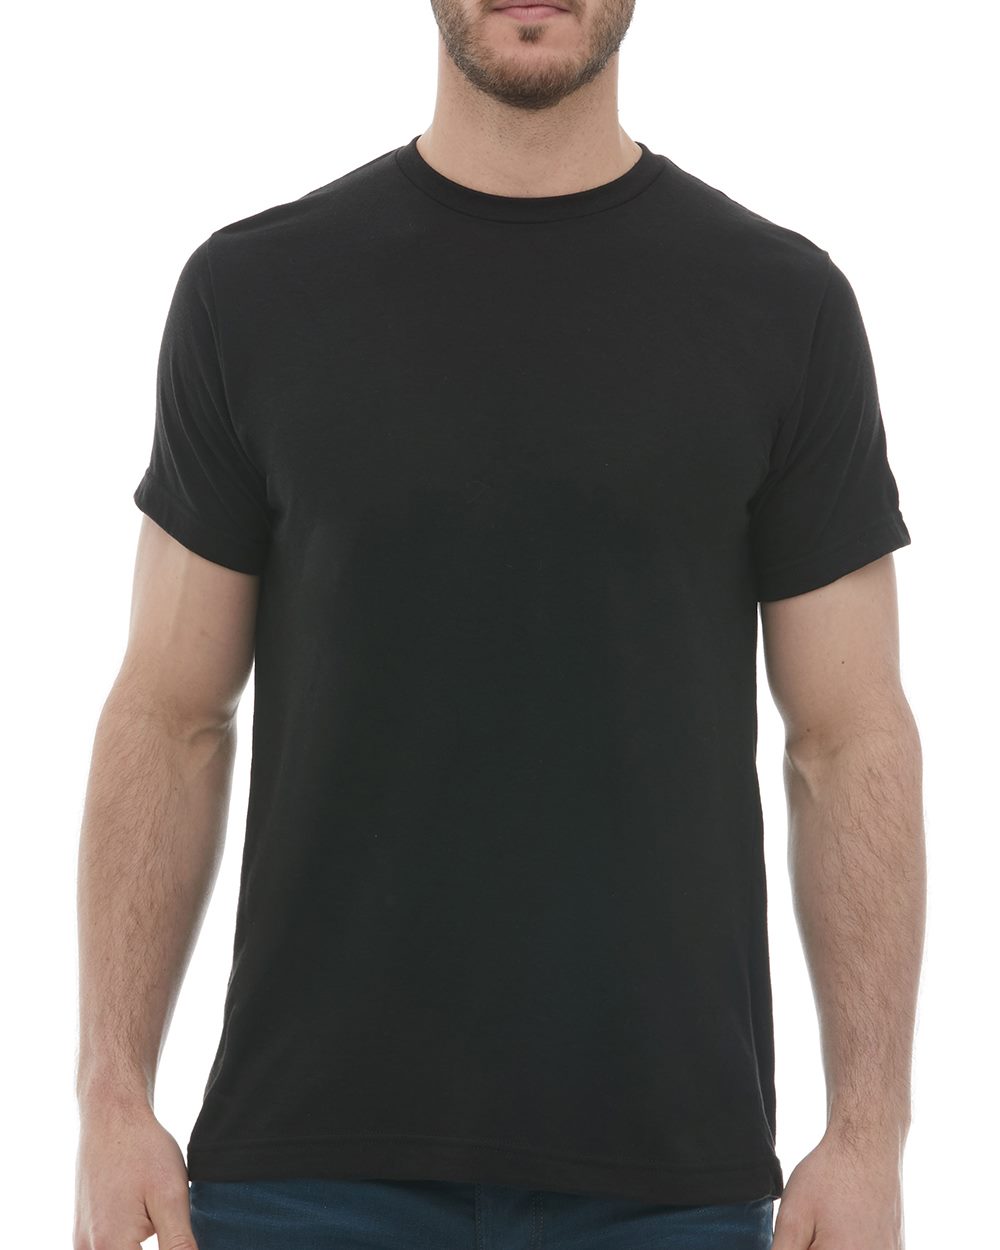 M&O – Deluxe Blend T-Shirt – 3541